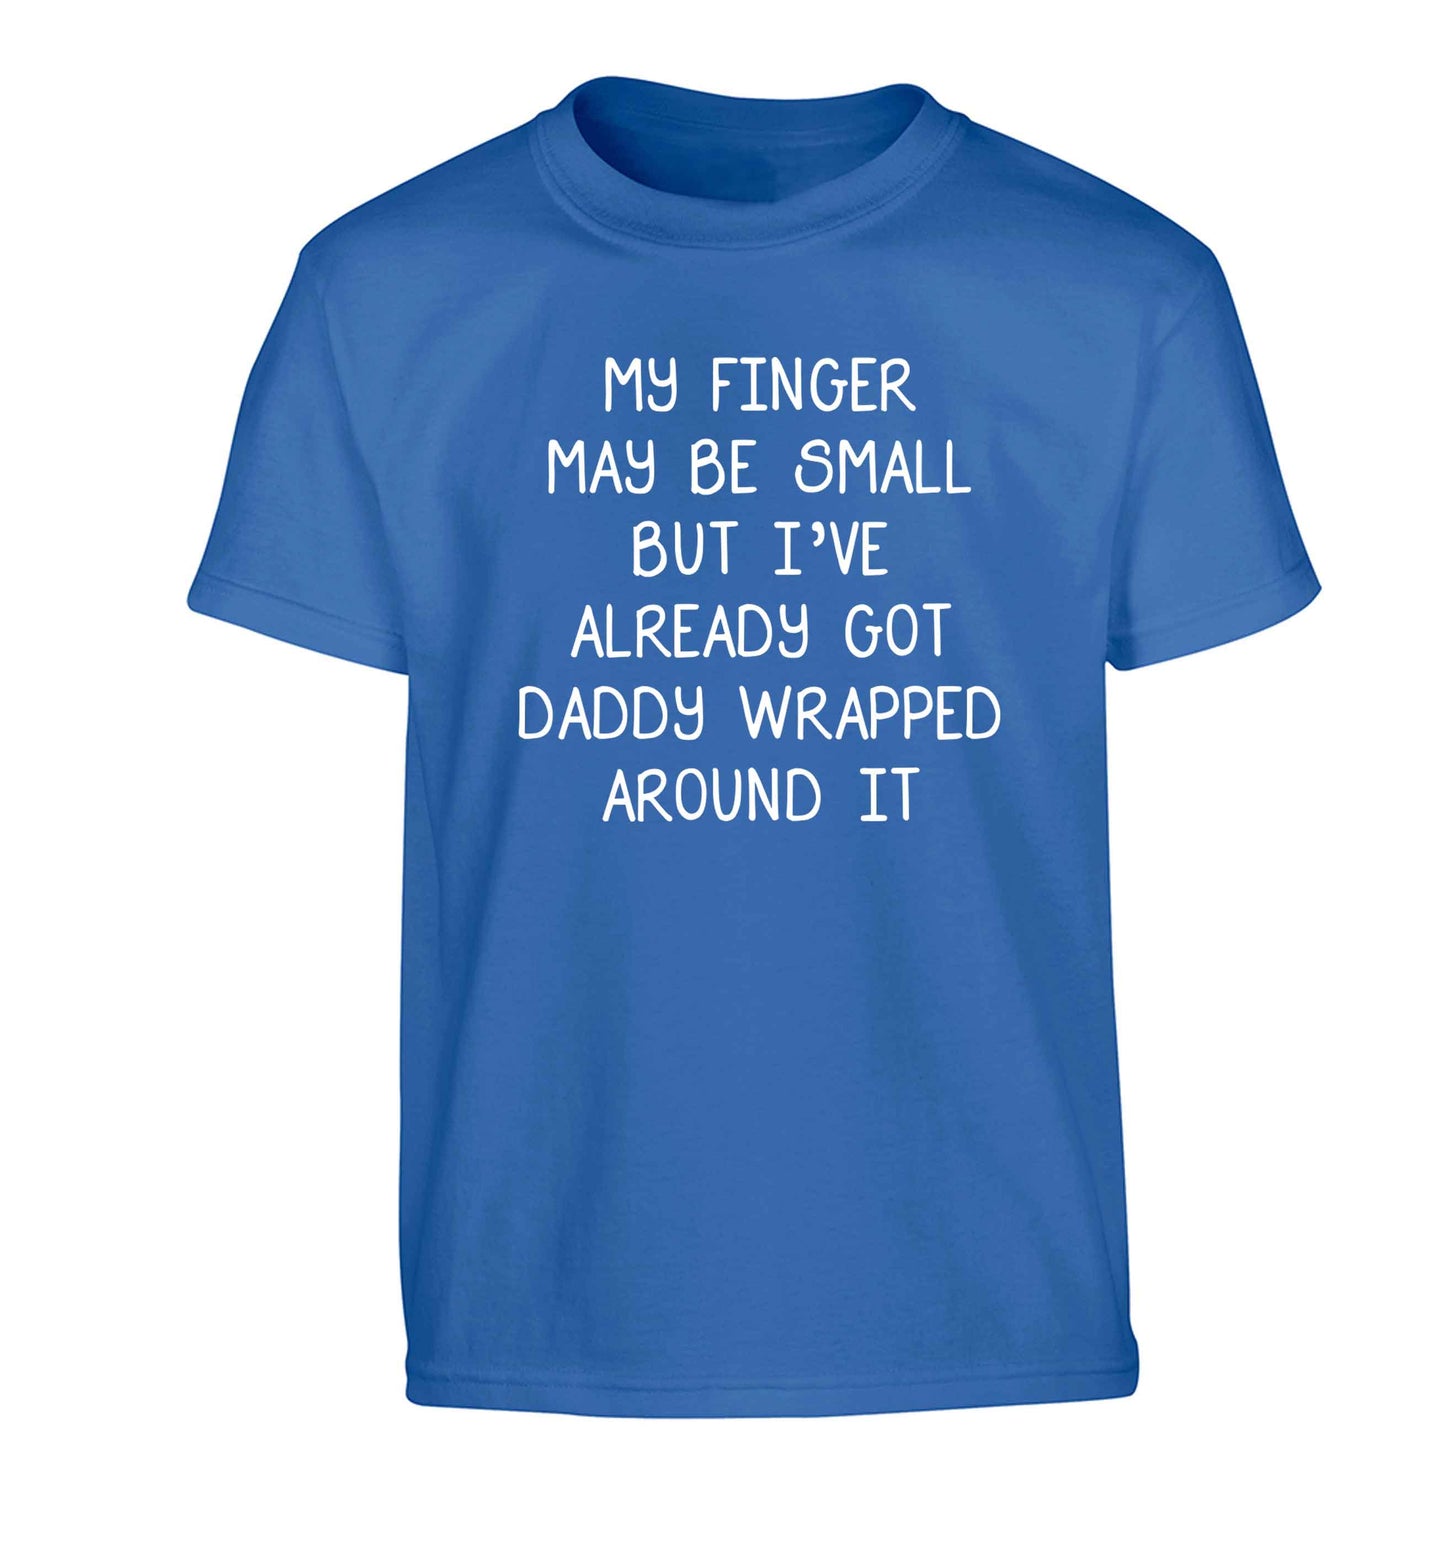 My finger may be small but I've already got daddy wrapped around it Children's blue Tshirt 12-13 Years